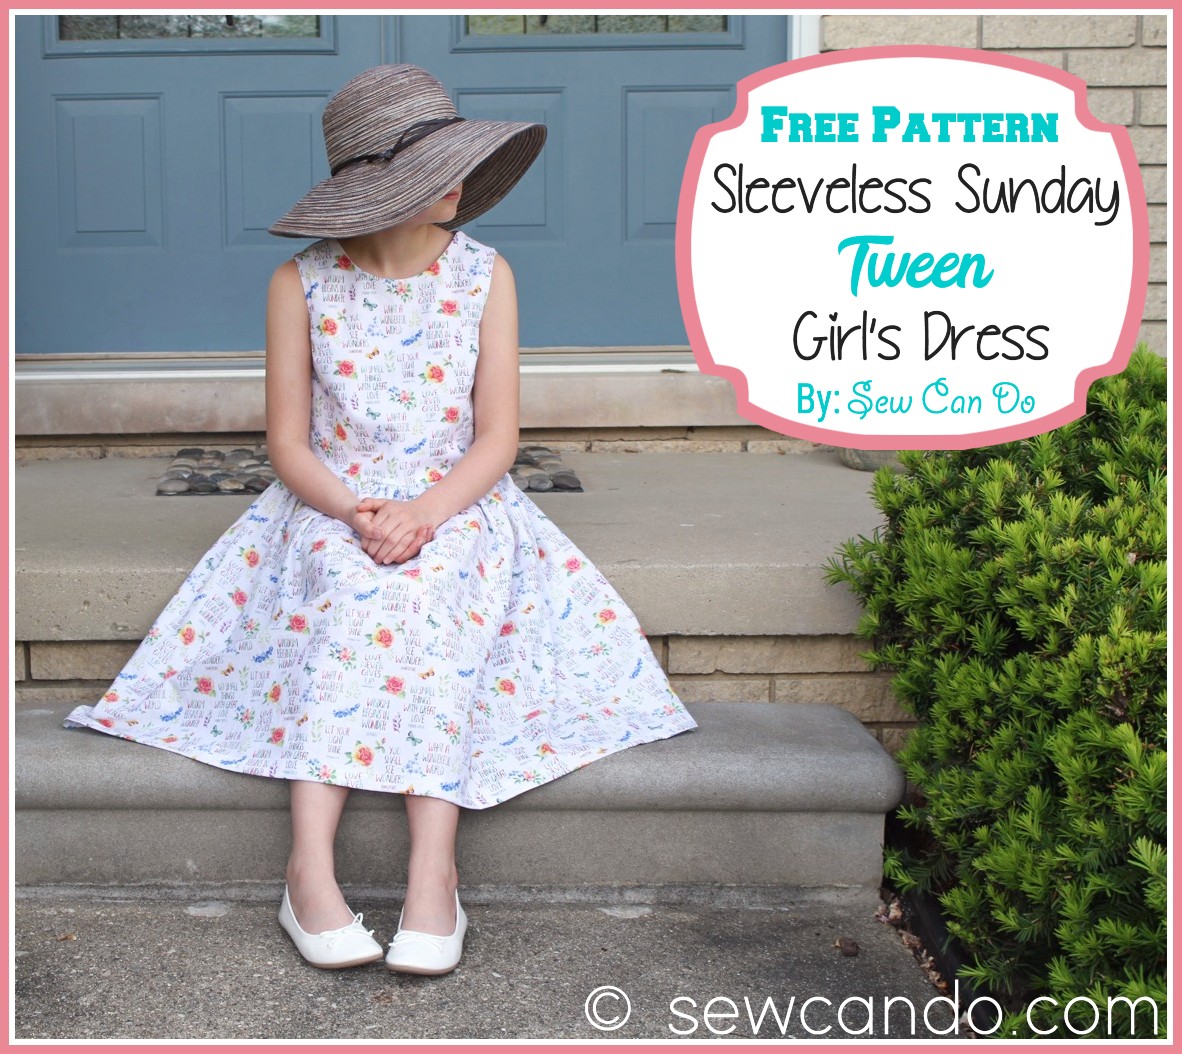 FREE SEWING PATTERNS: 20 Easy Summer Patterns for Women  On the Cutting  Floor: Printable pdf sewing patterns and tutorials for women